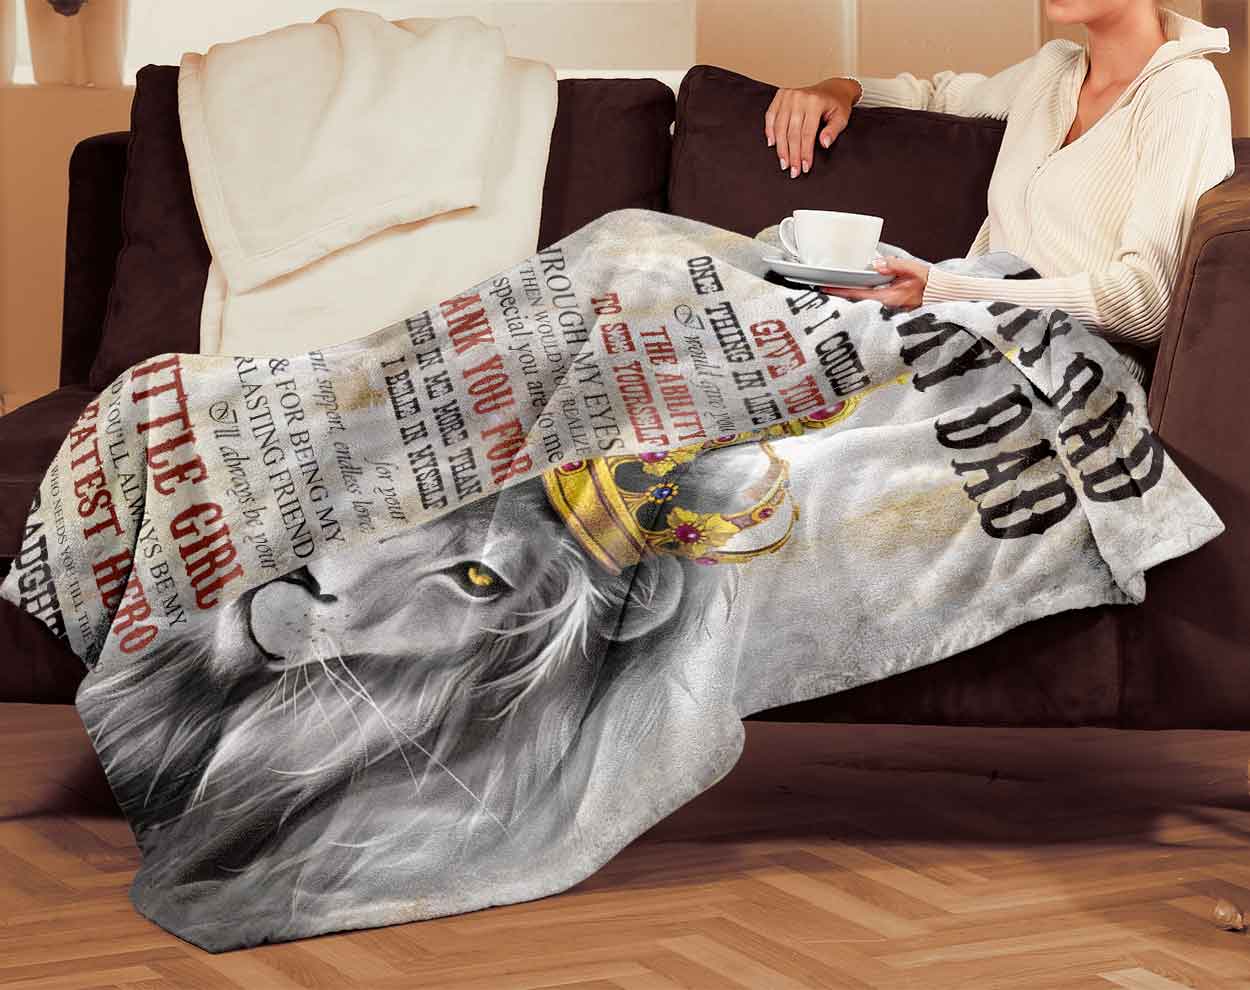 Skitongifts Blanket For Sofa Throws, Bed Throws Blanket - To My Dad If I Could Give You One Thing In Life Your Daughter-TT2701